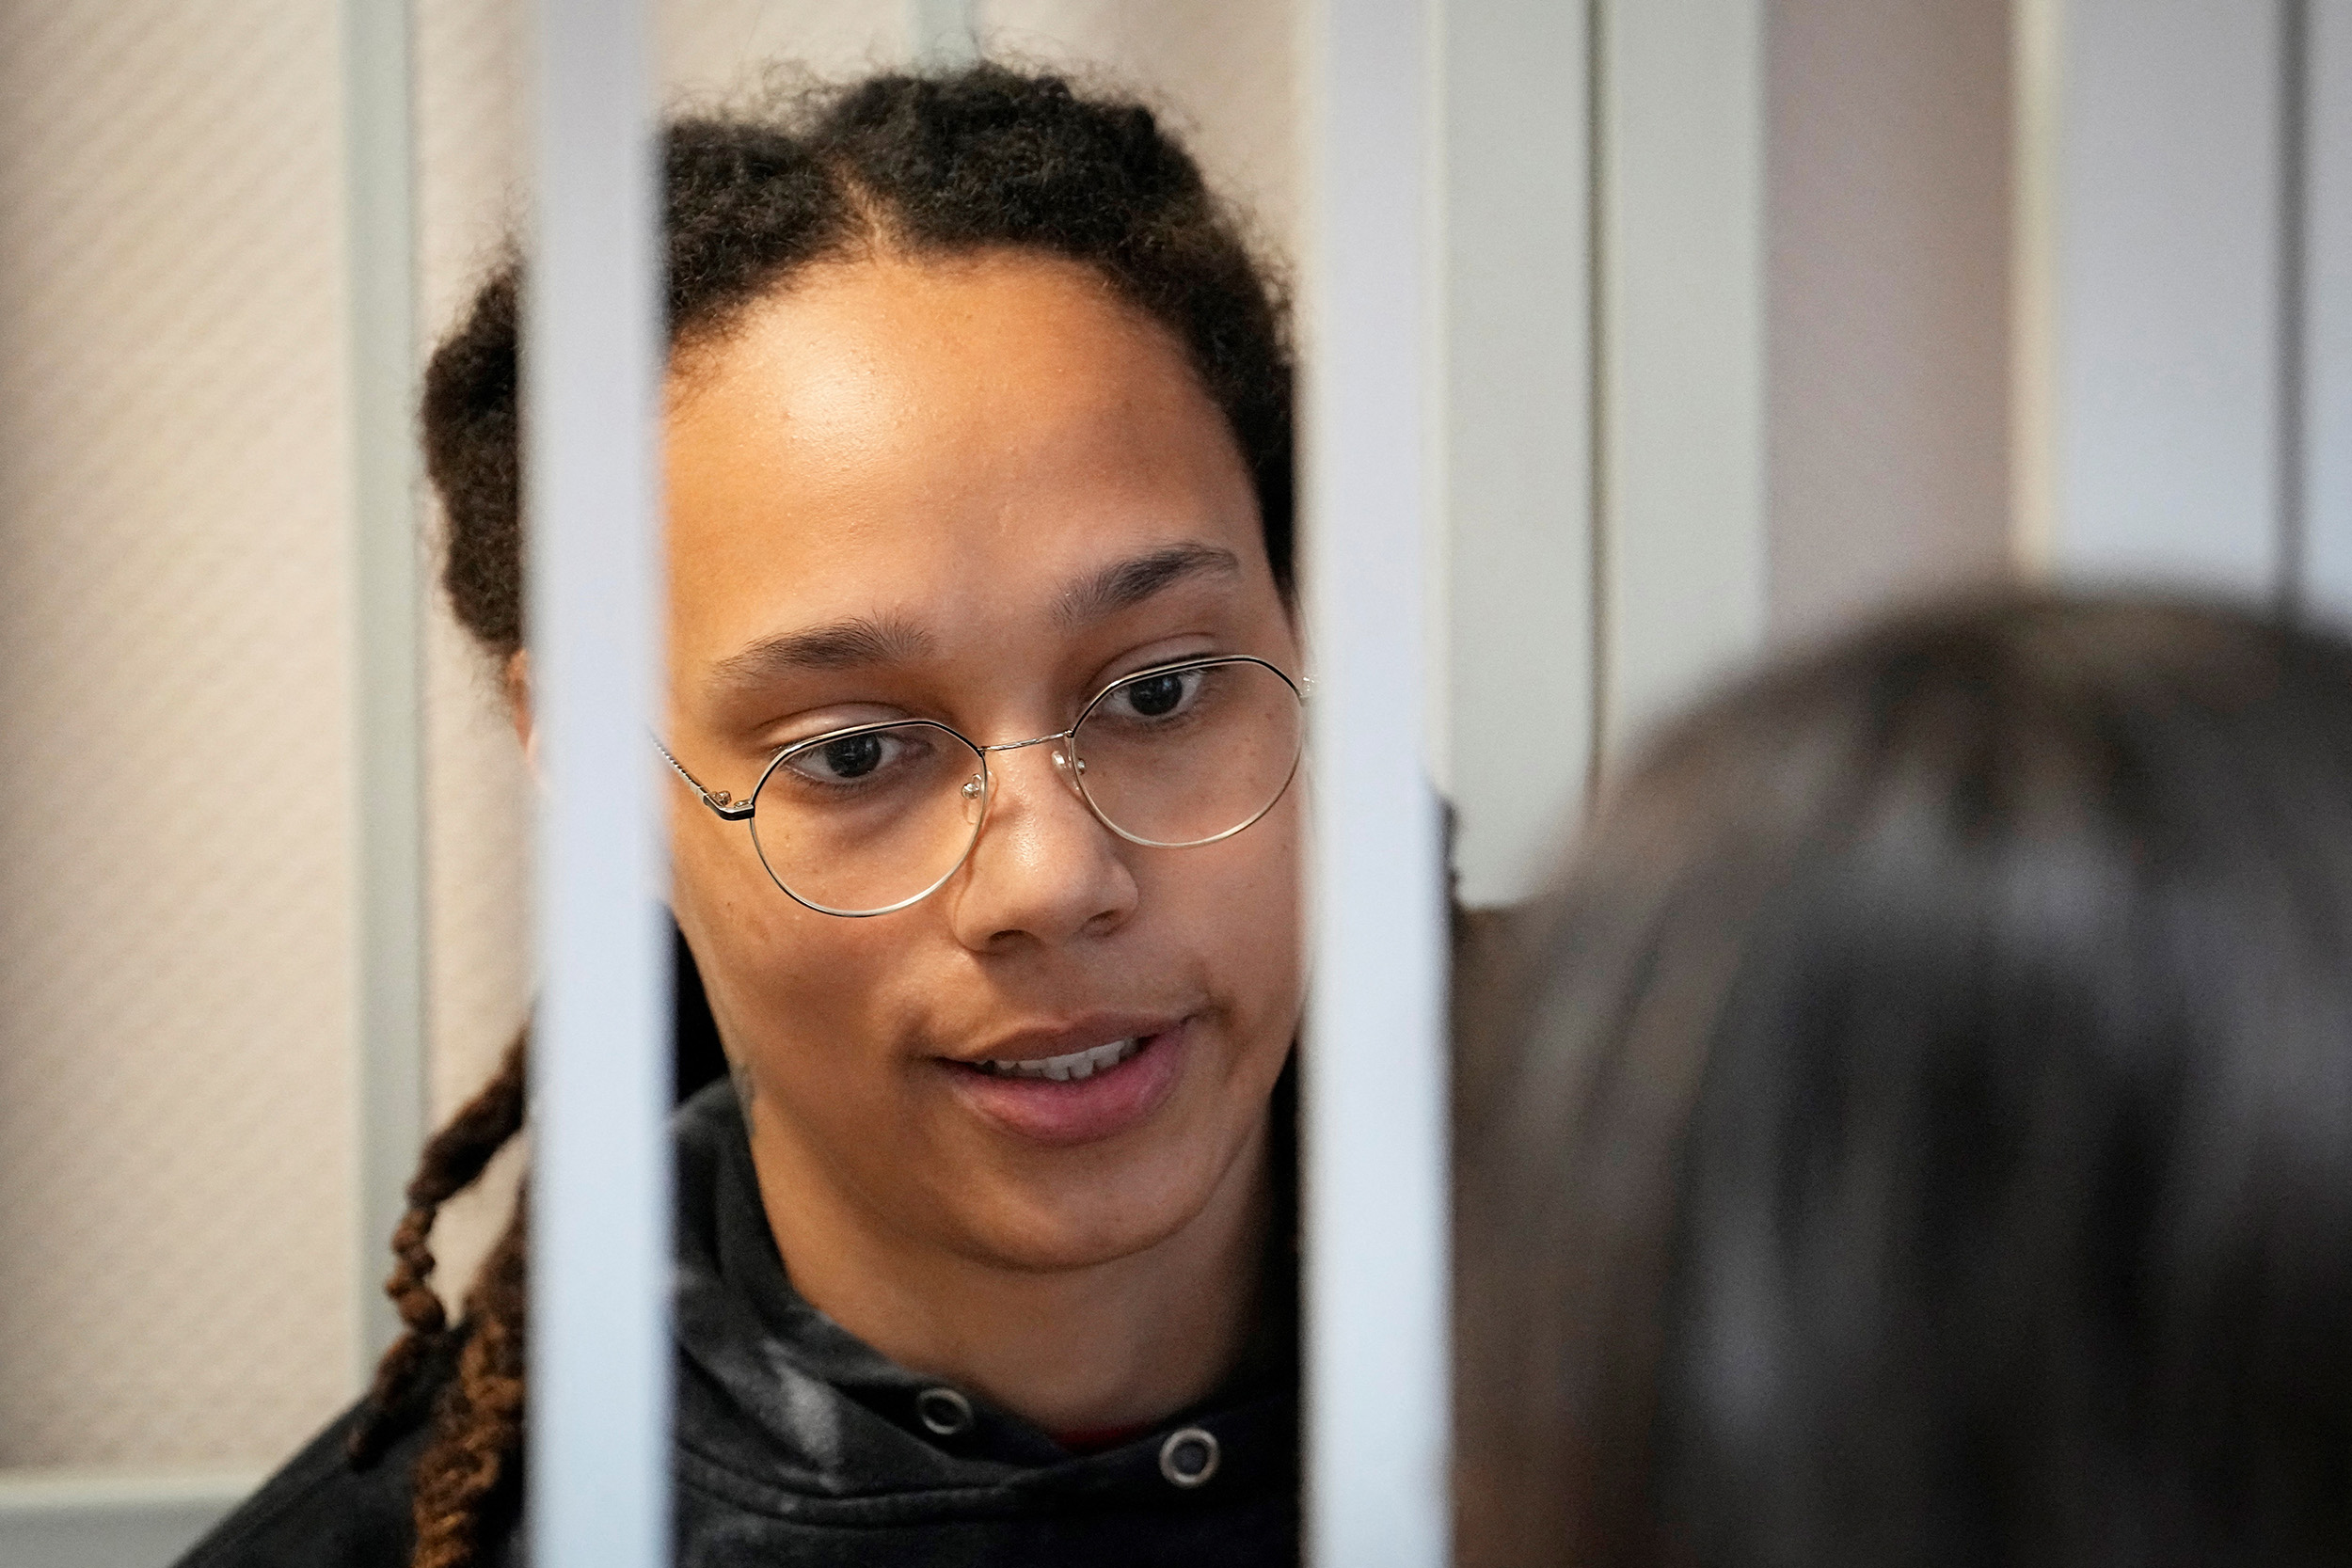 WNBA star and two-time Olympic gold medalist Brittney Griner speaks with her lawyers standing in a cage at a court room prior to a hearing, in Khimki just outside Moscow, Russia, on July 26.